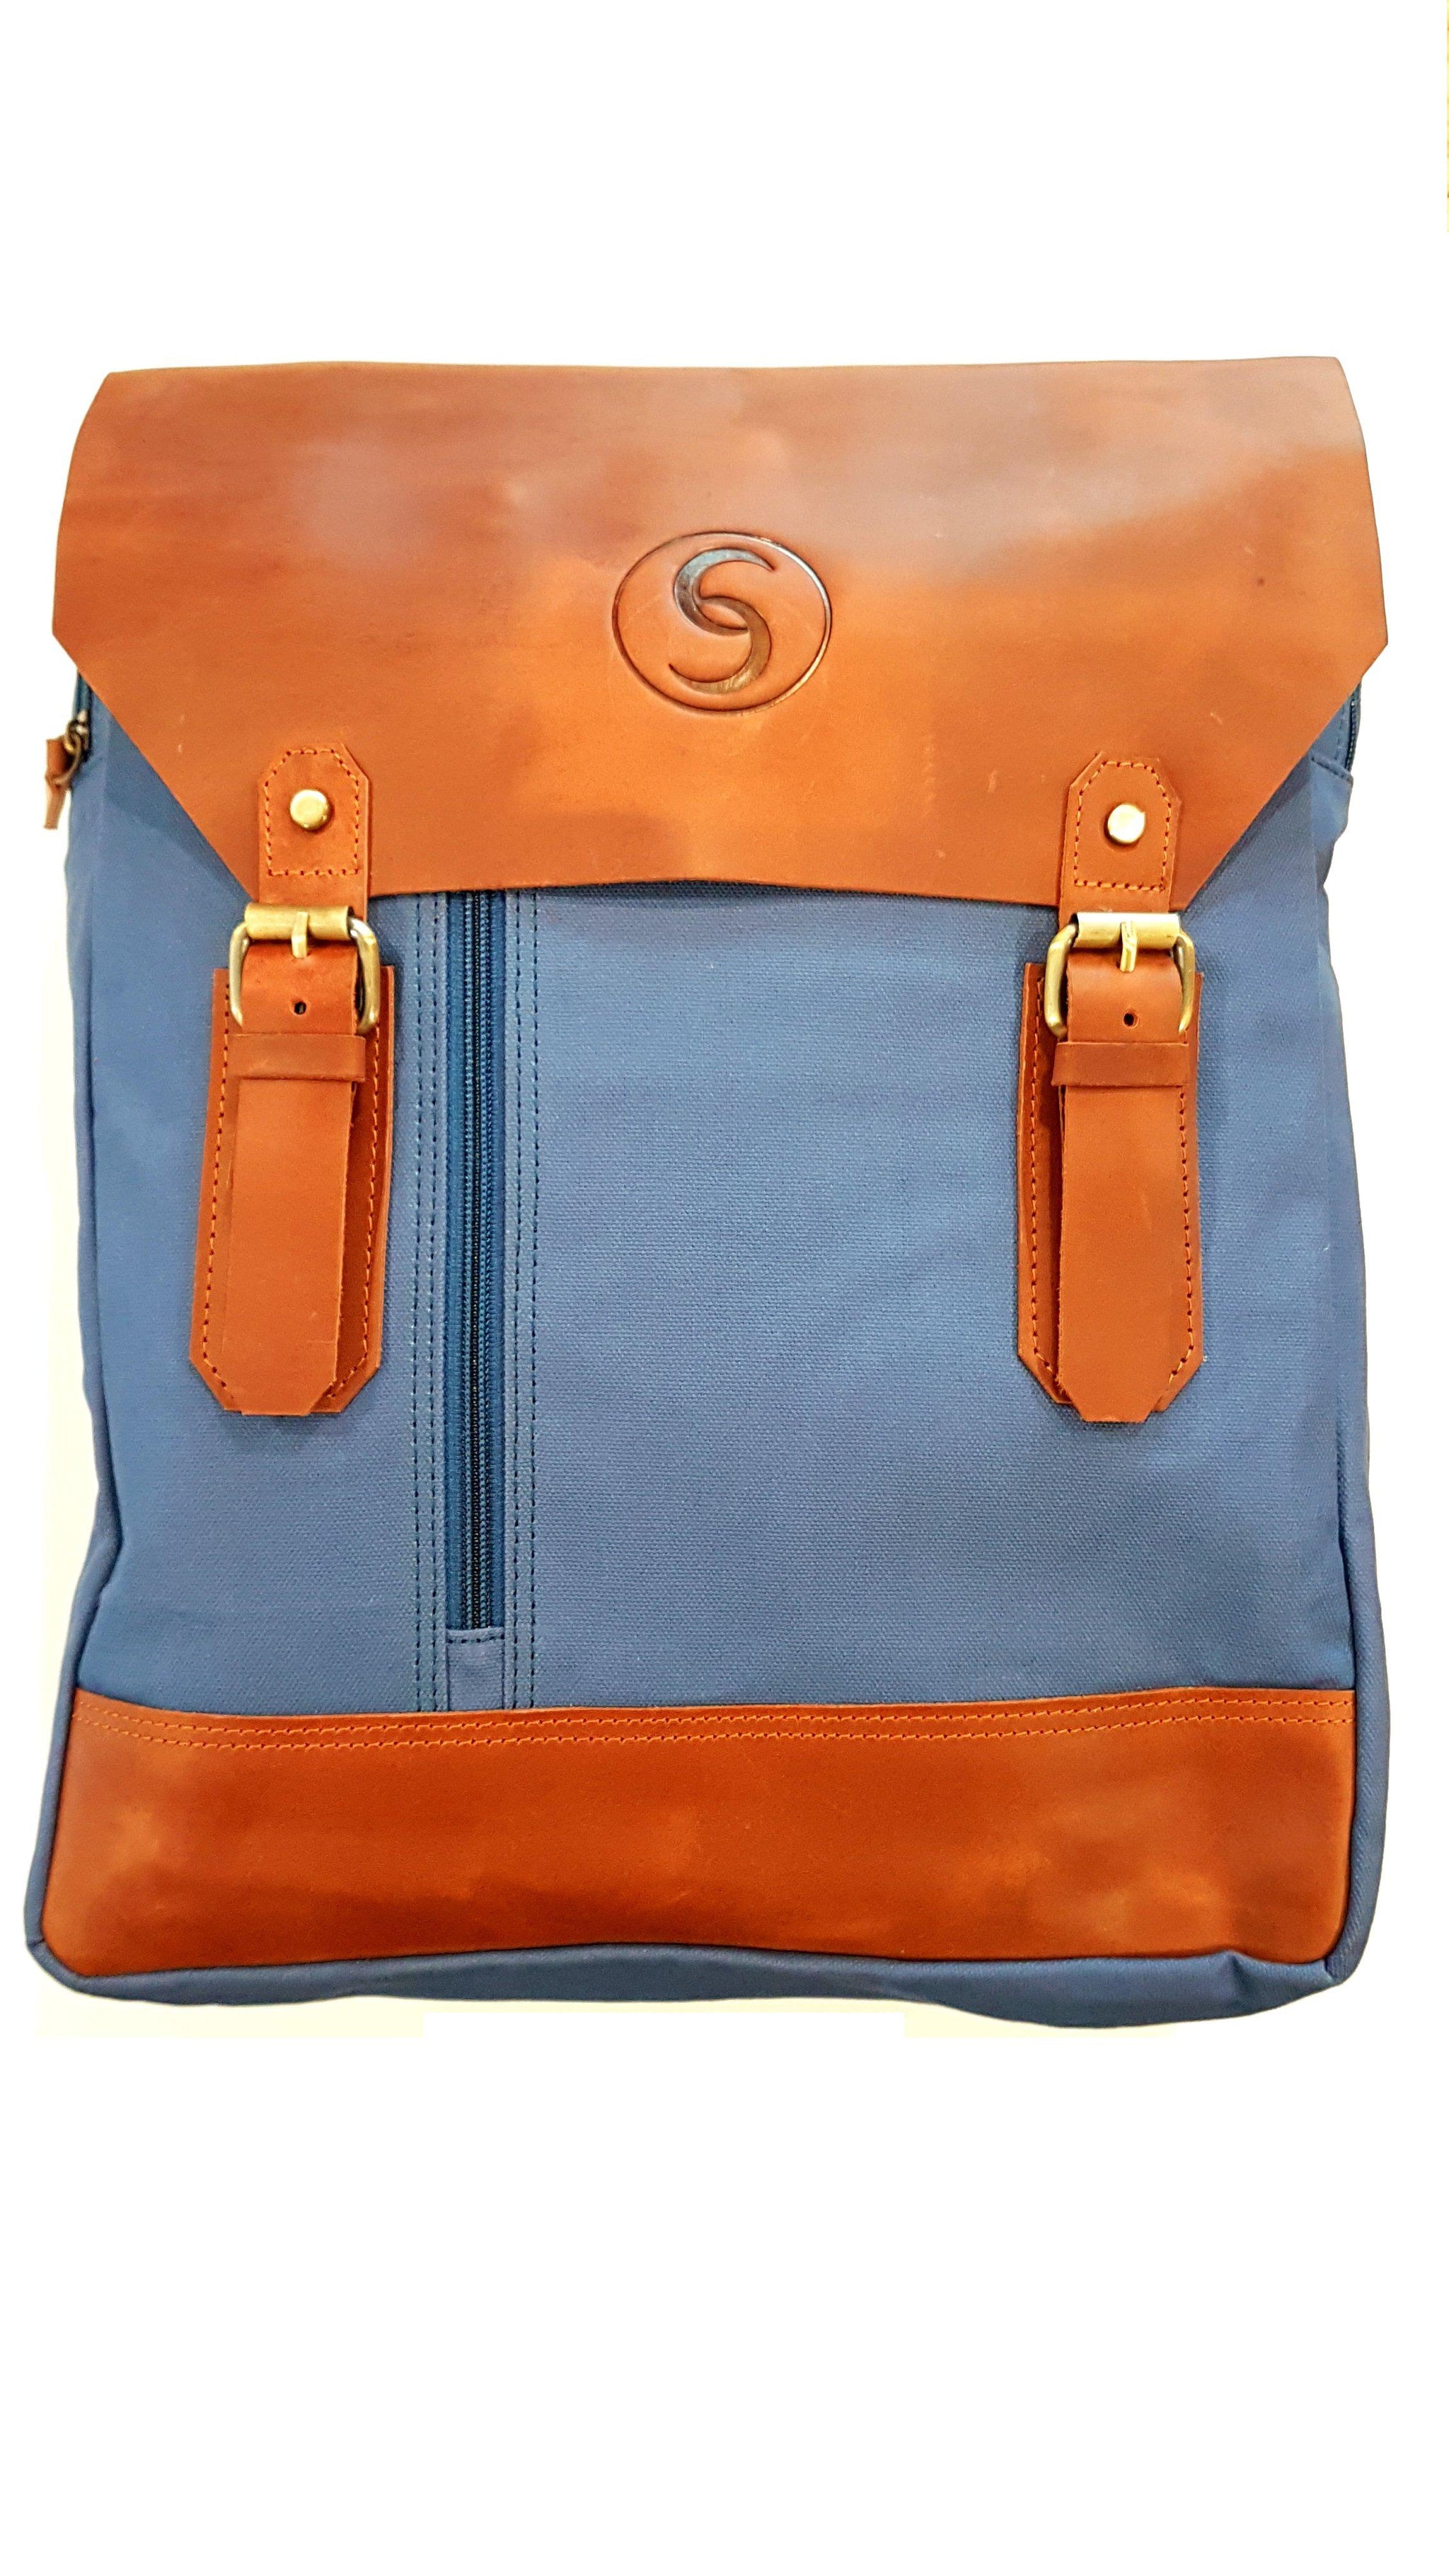 The Journey collection - The backpack collection by Chef's satchel